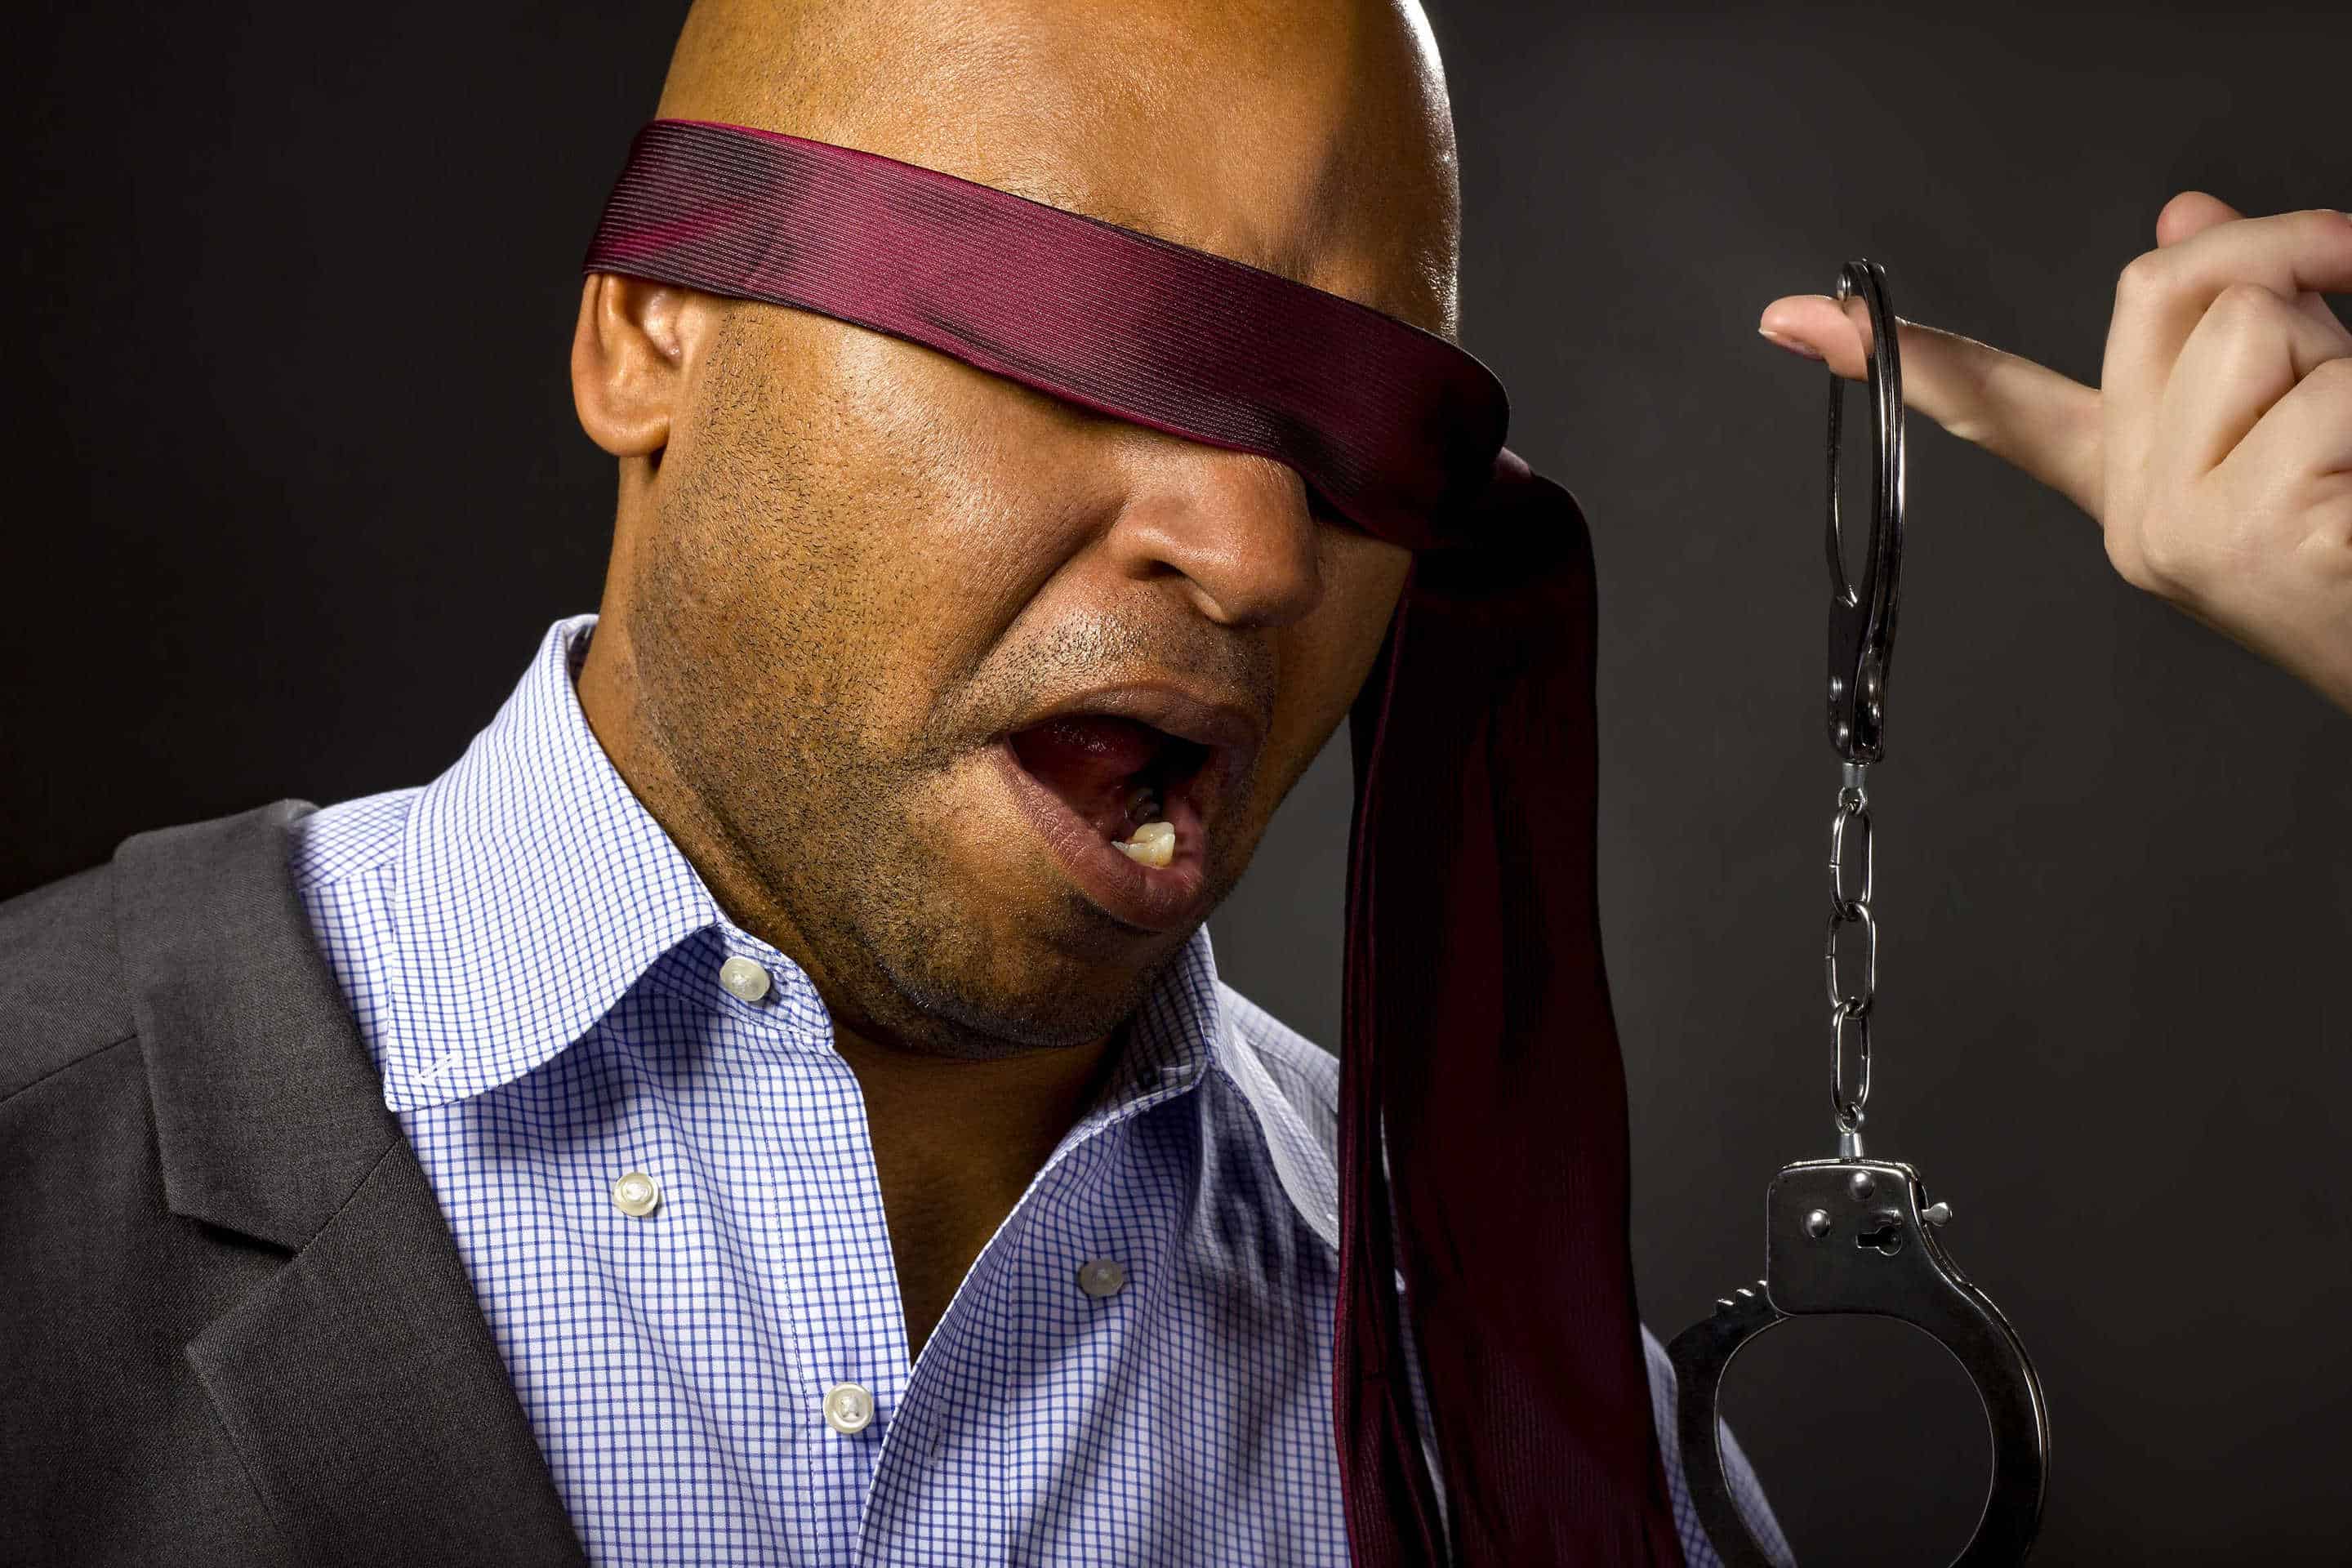 Surprised man in blindfold and handcuffs